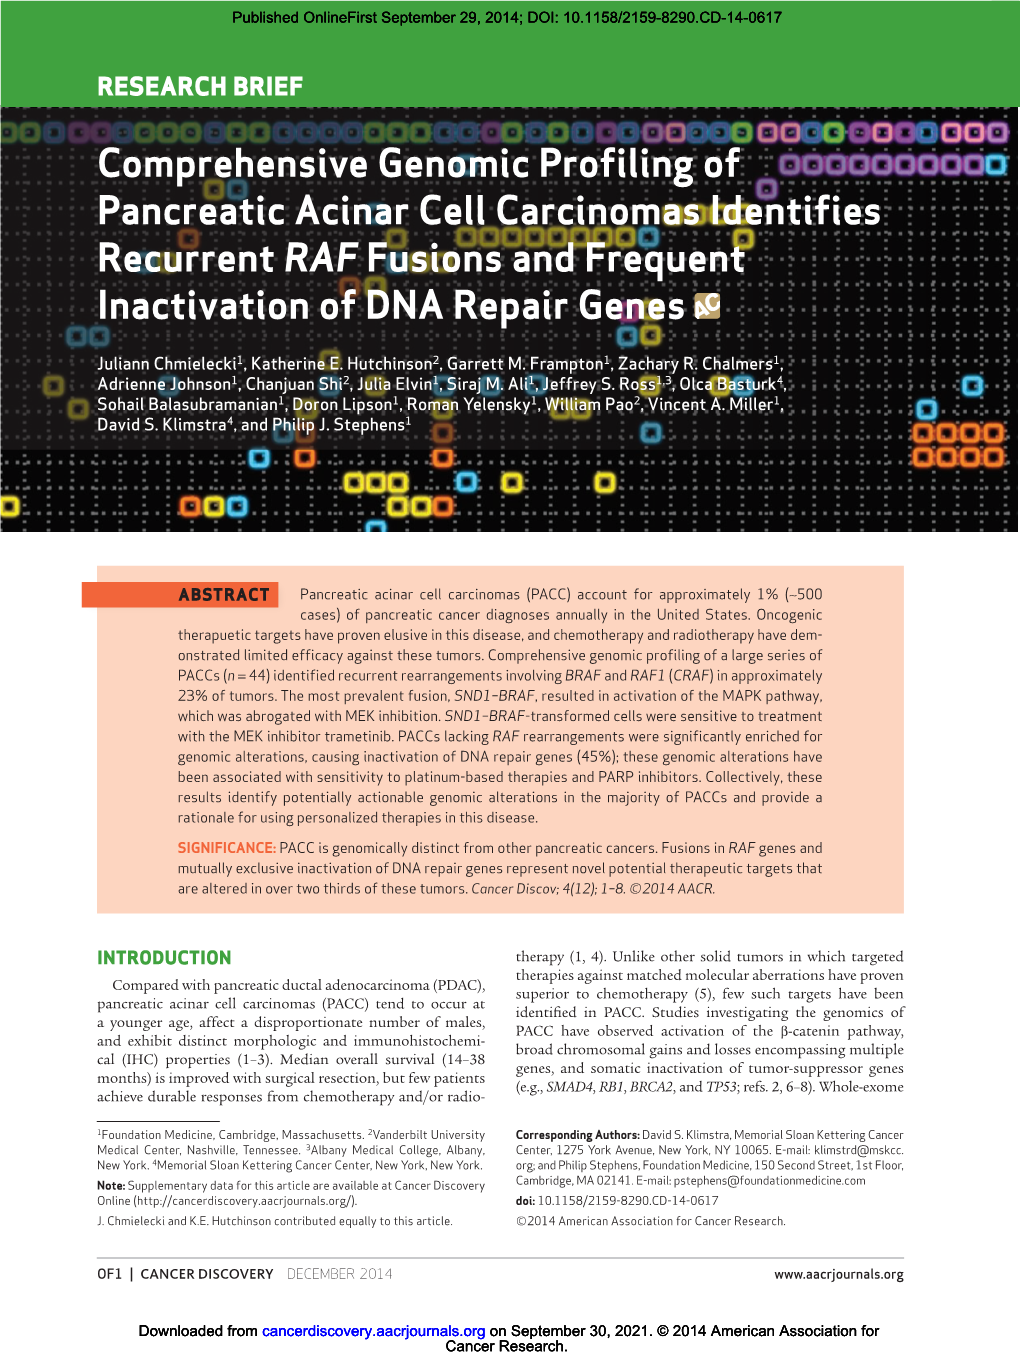 Comprehensive Genomic Profiling of Pancreatic Acinar Cell Carcinomas Identifies Recurrent RAF Fusions and Frequent Inactivation of DNA Repair Genes